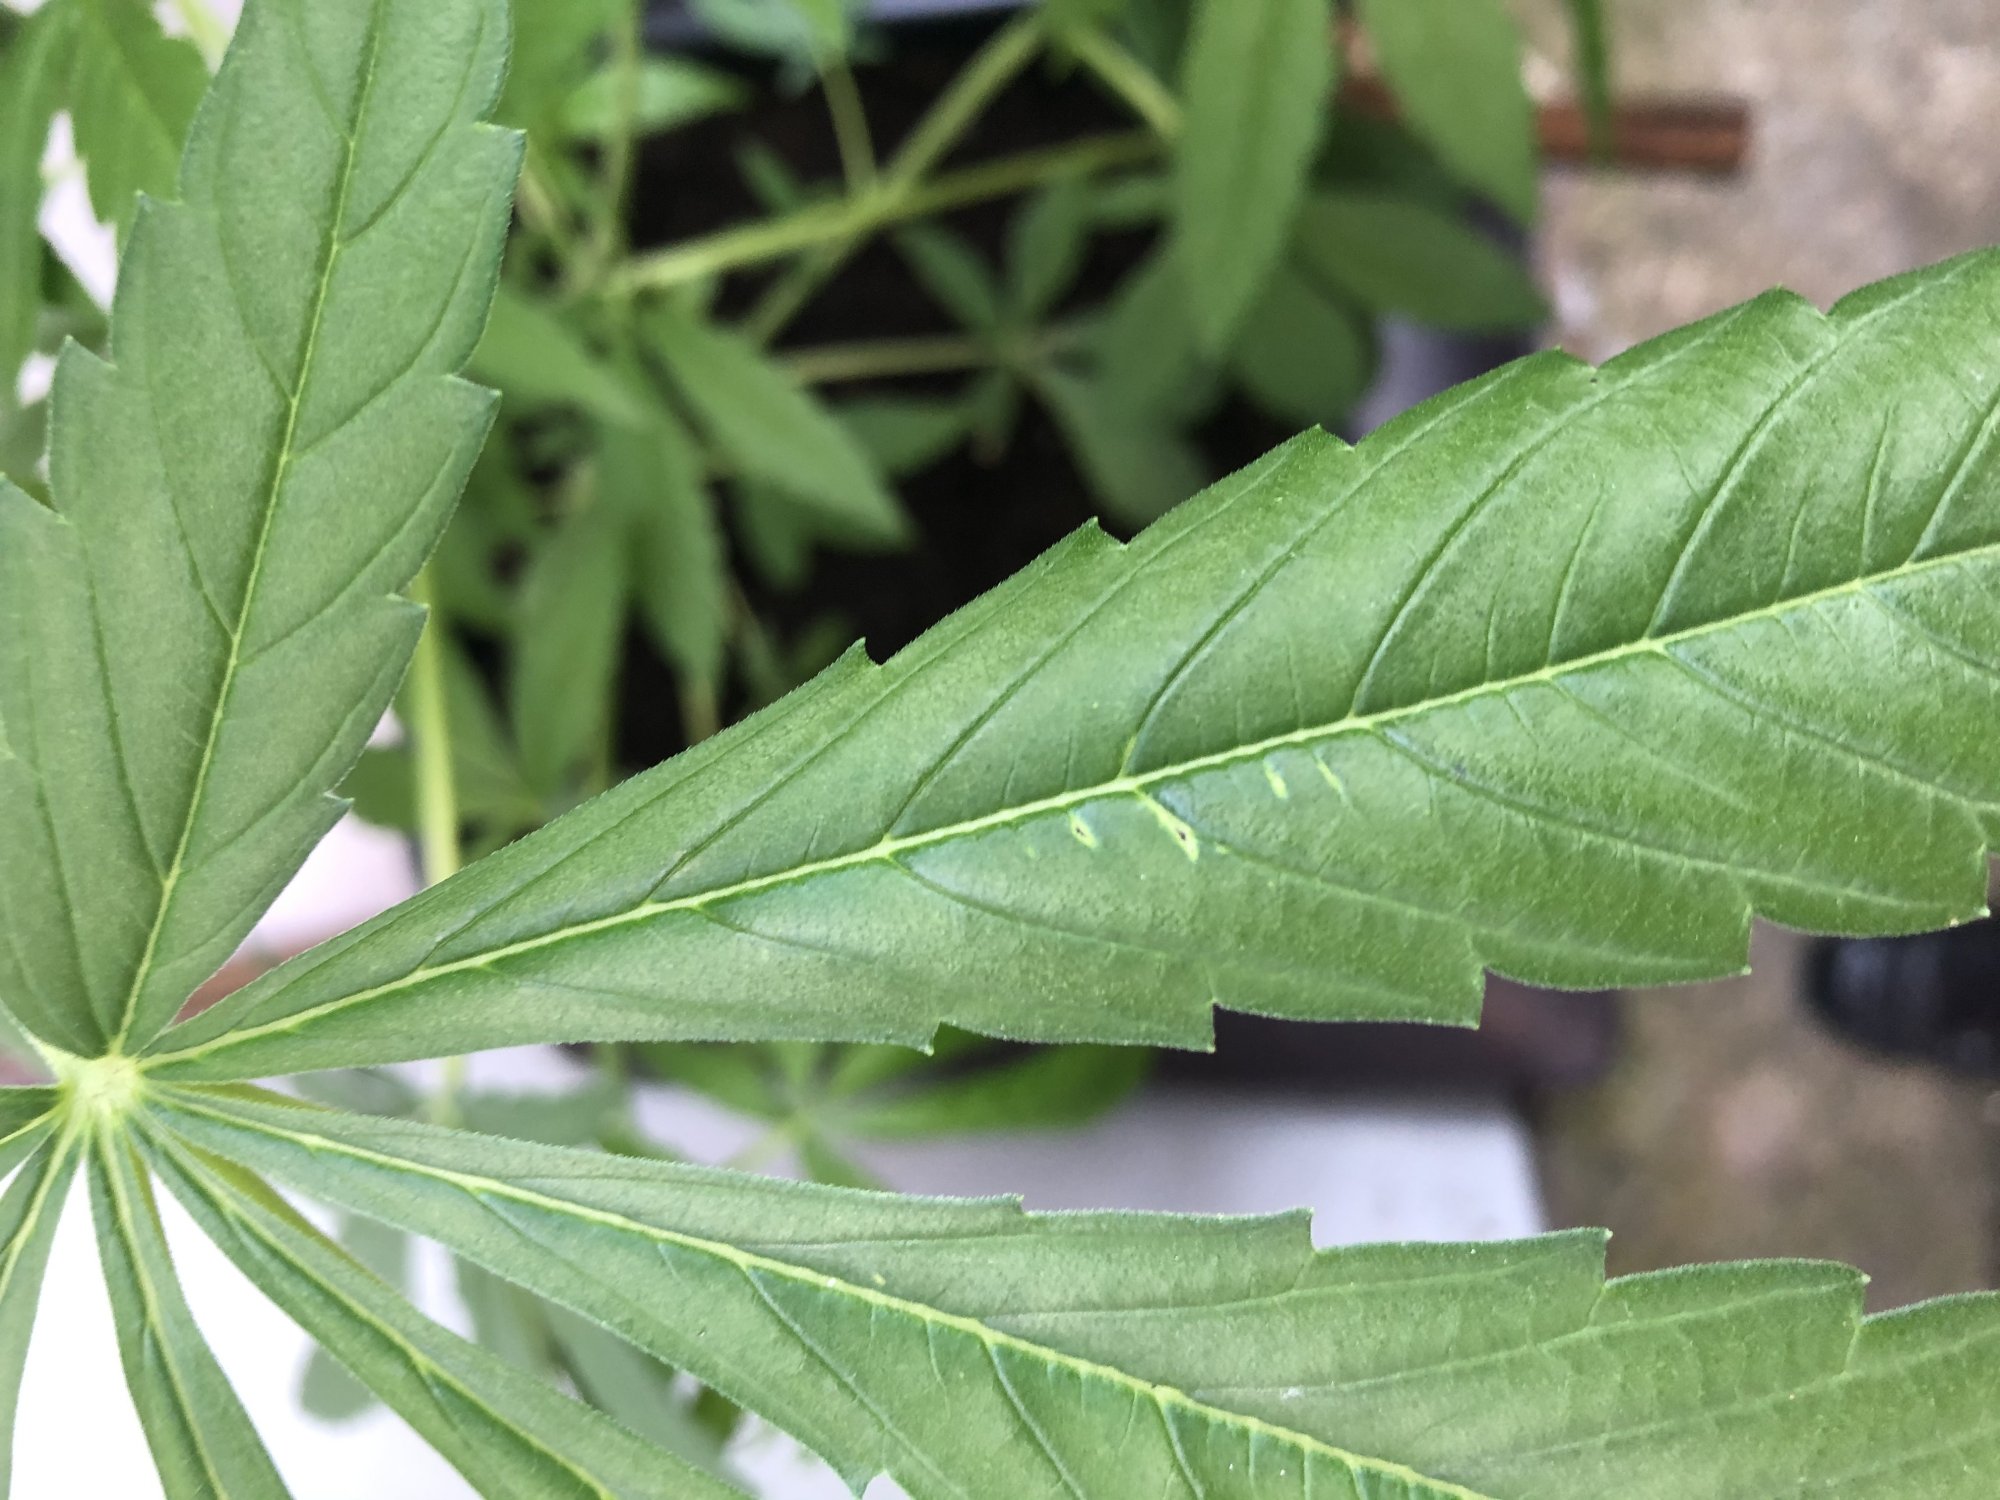 Holes appearing in leafs help and info please 4